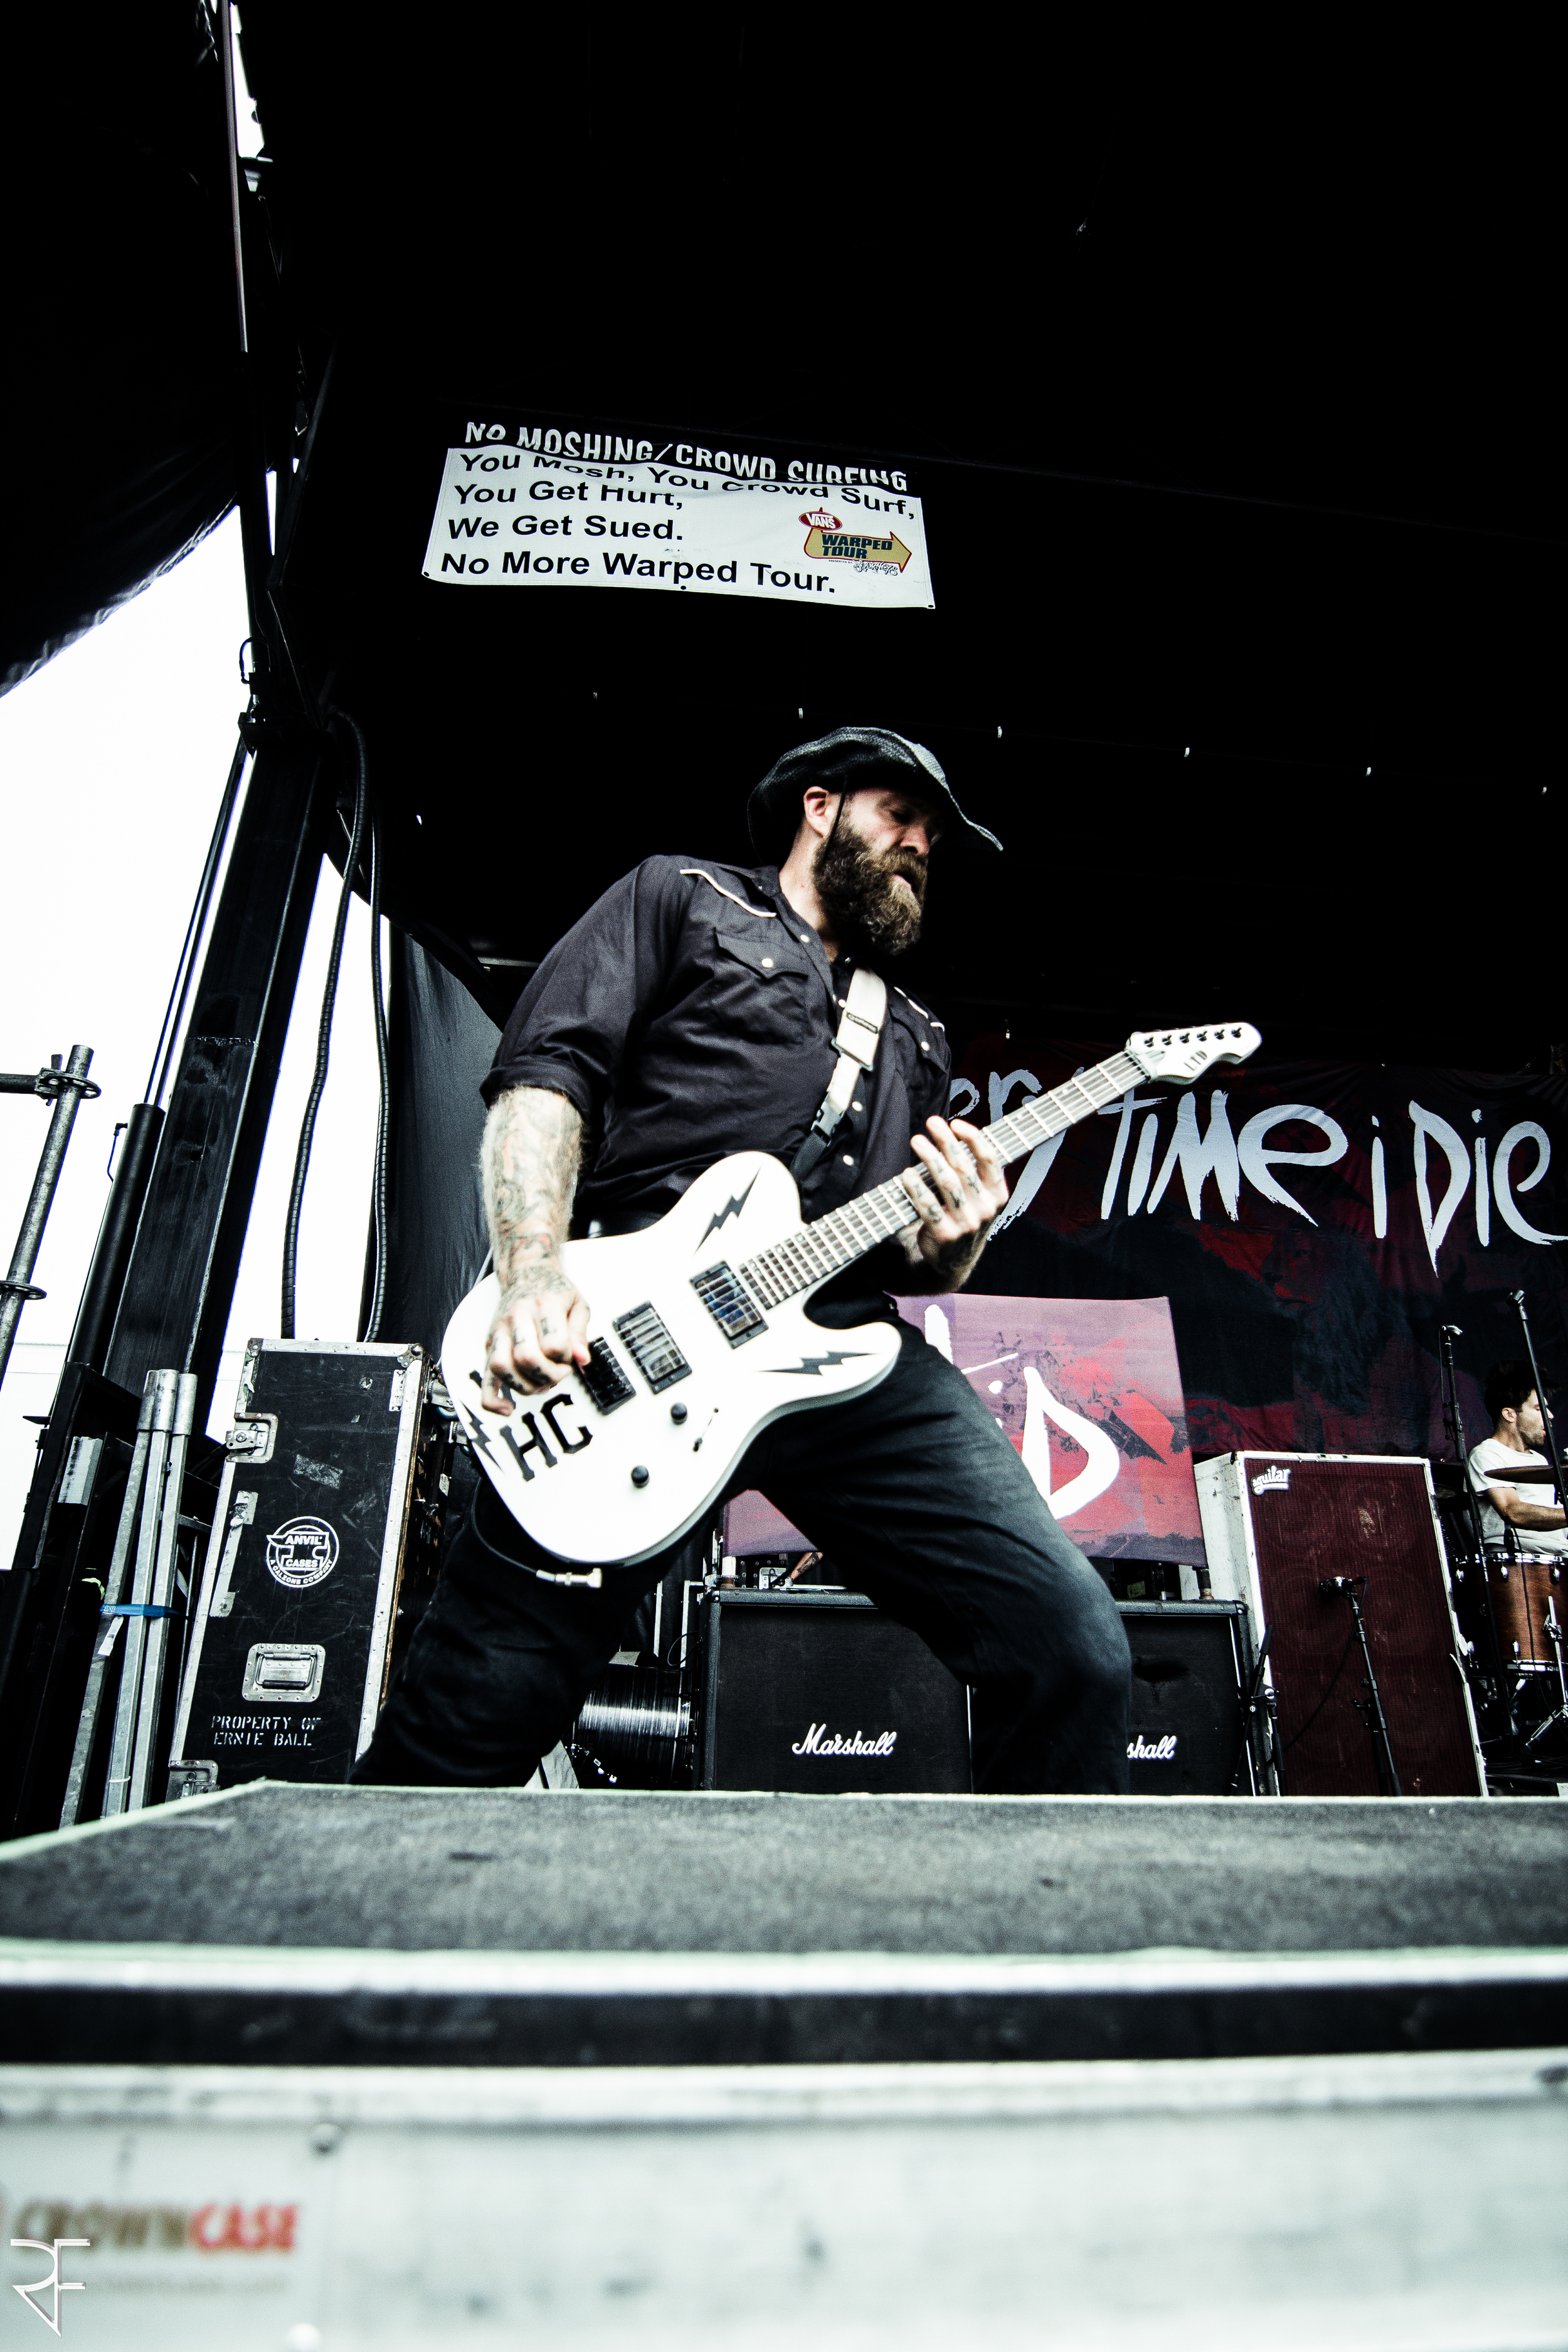  Every Time I Die 